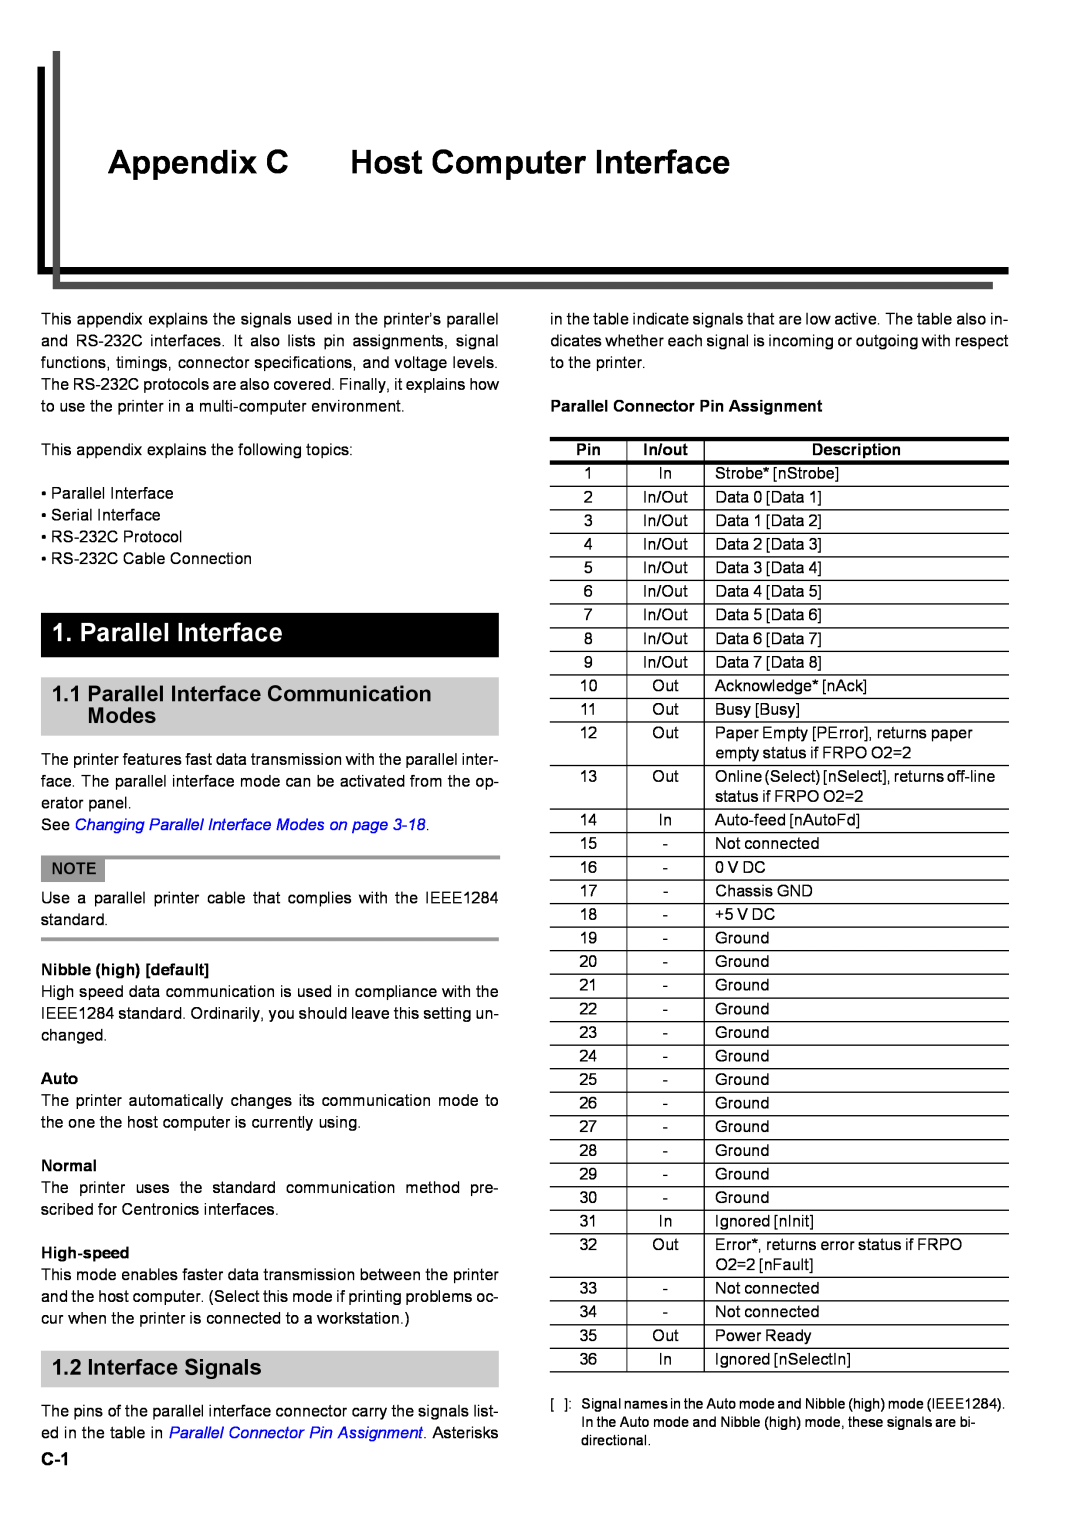 Kyocera S-9100DN manual Appendix C Host Computer Interface, See Changing Parallel Interface Modes on page, Auto, Normal 